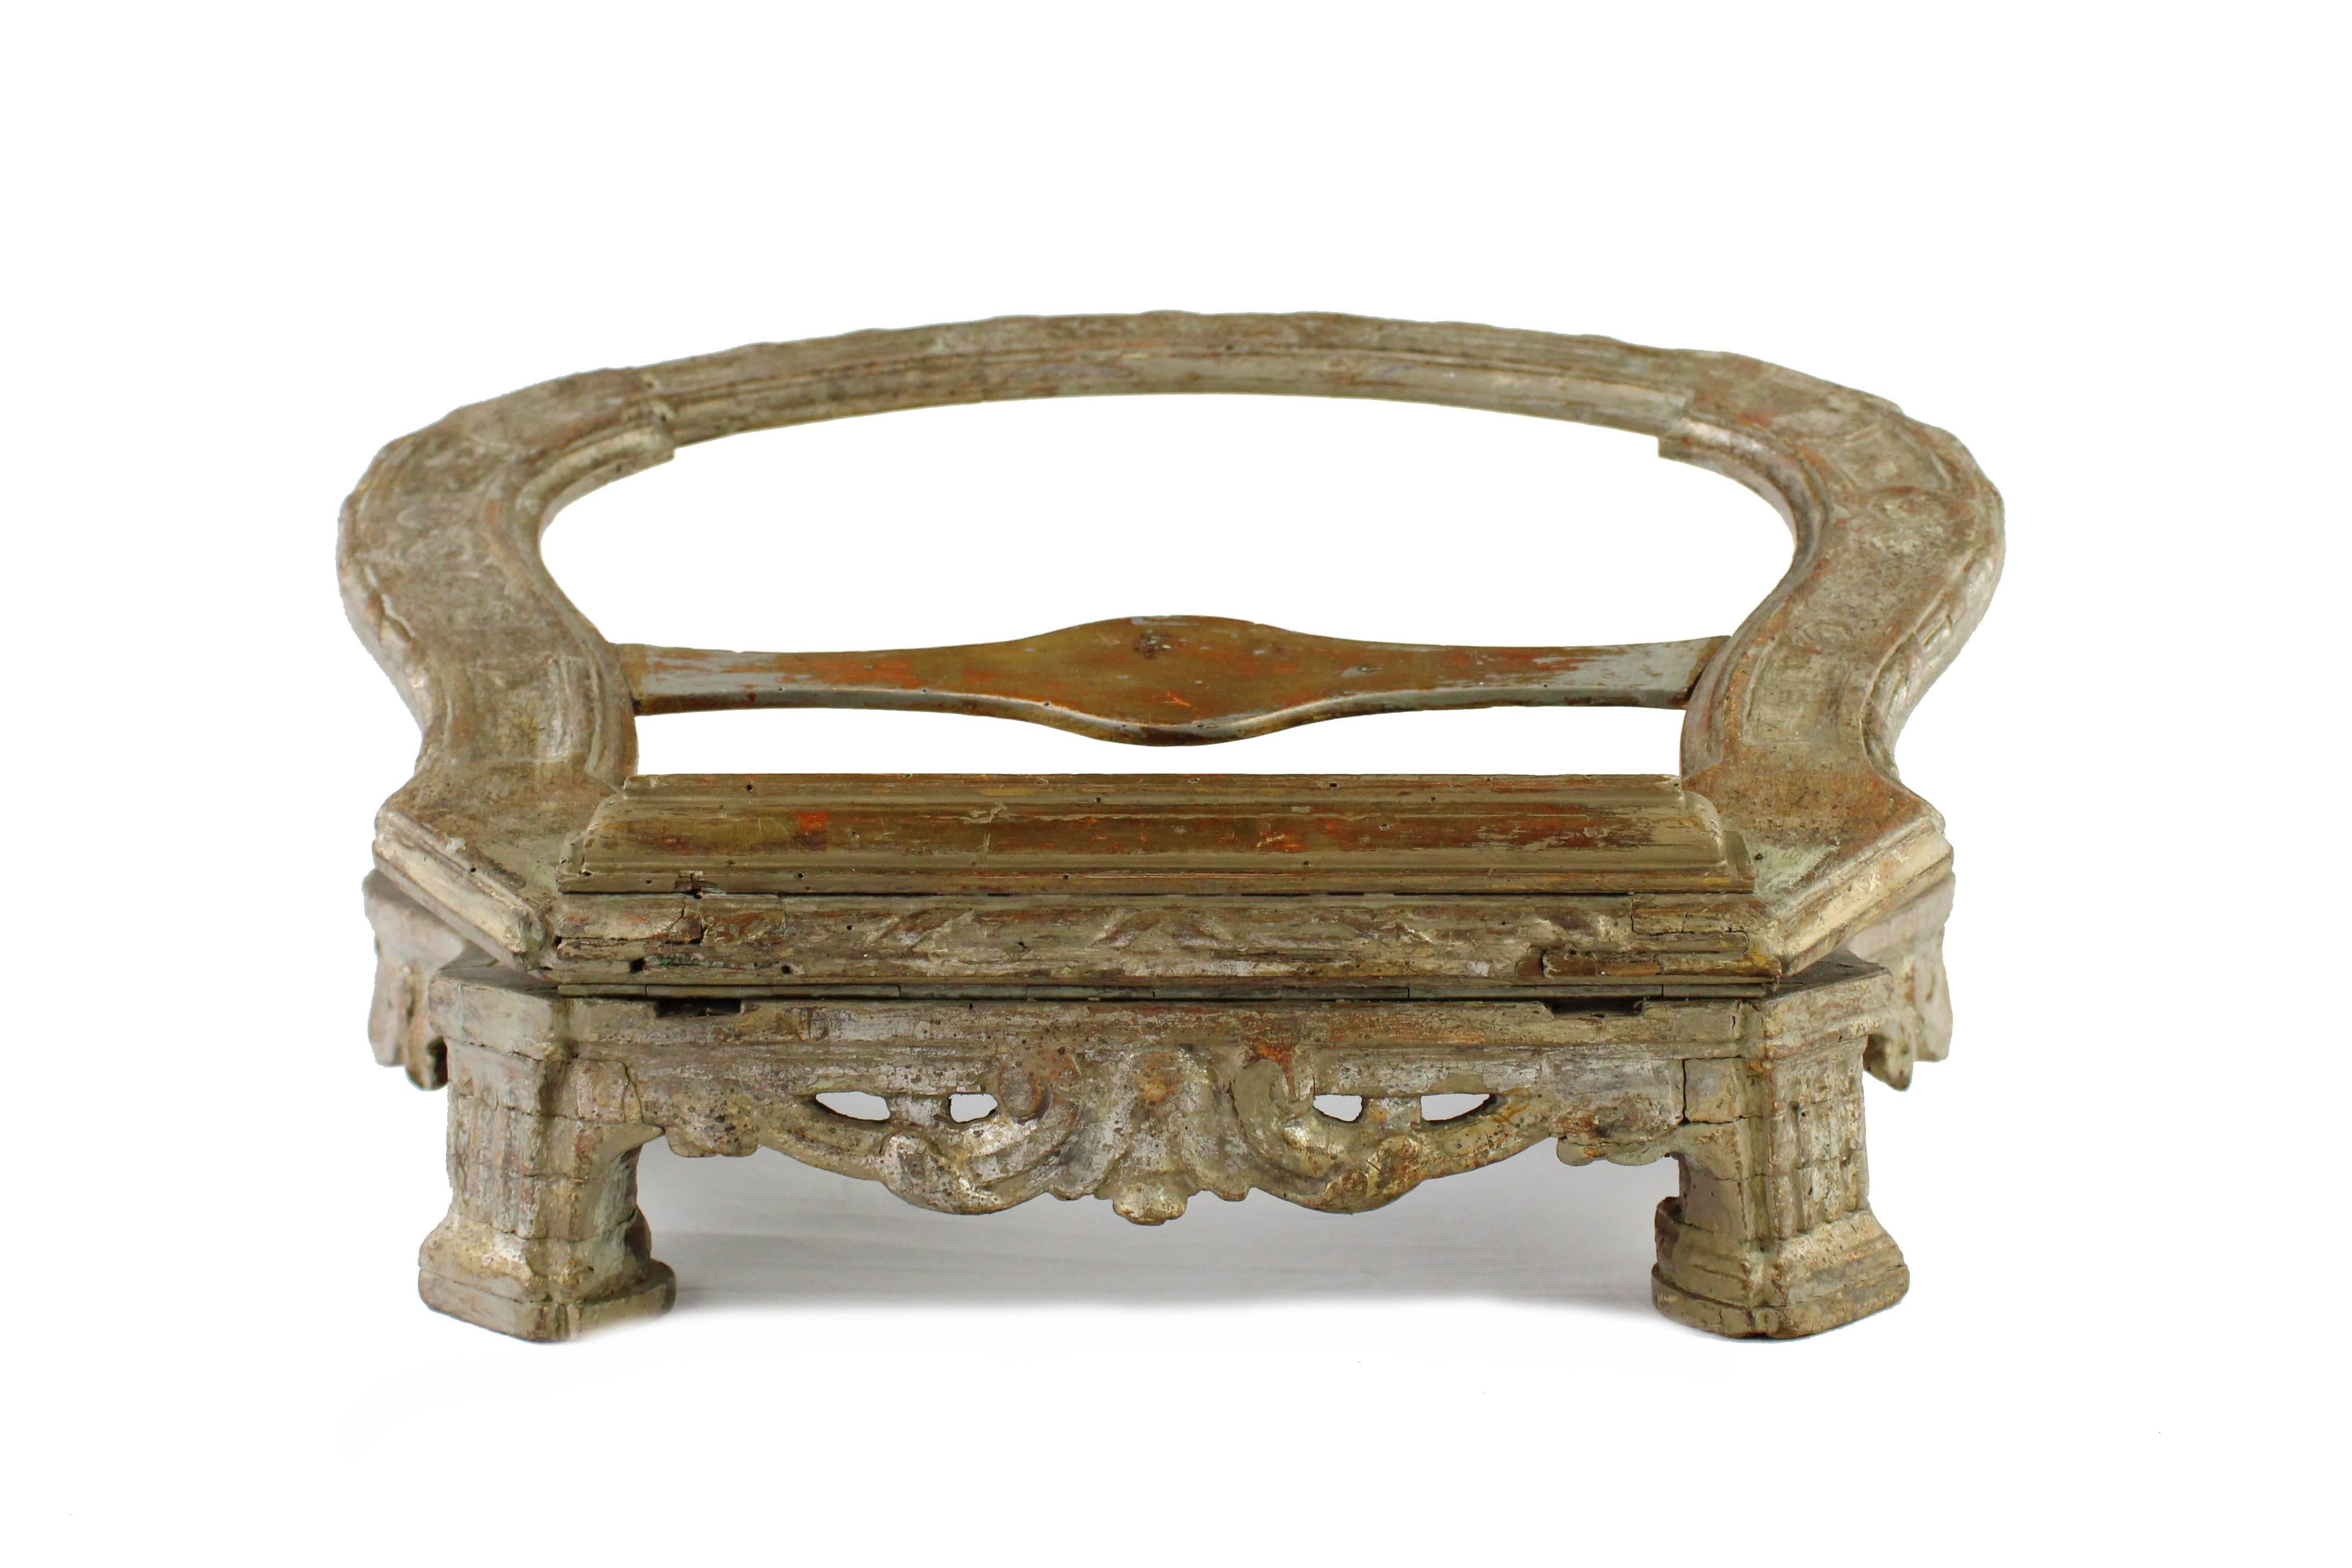 Late 18th Century Book Stand, Late Baroque, Wood, Gold and Silvery Surface, circa 1770-1780